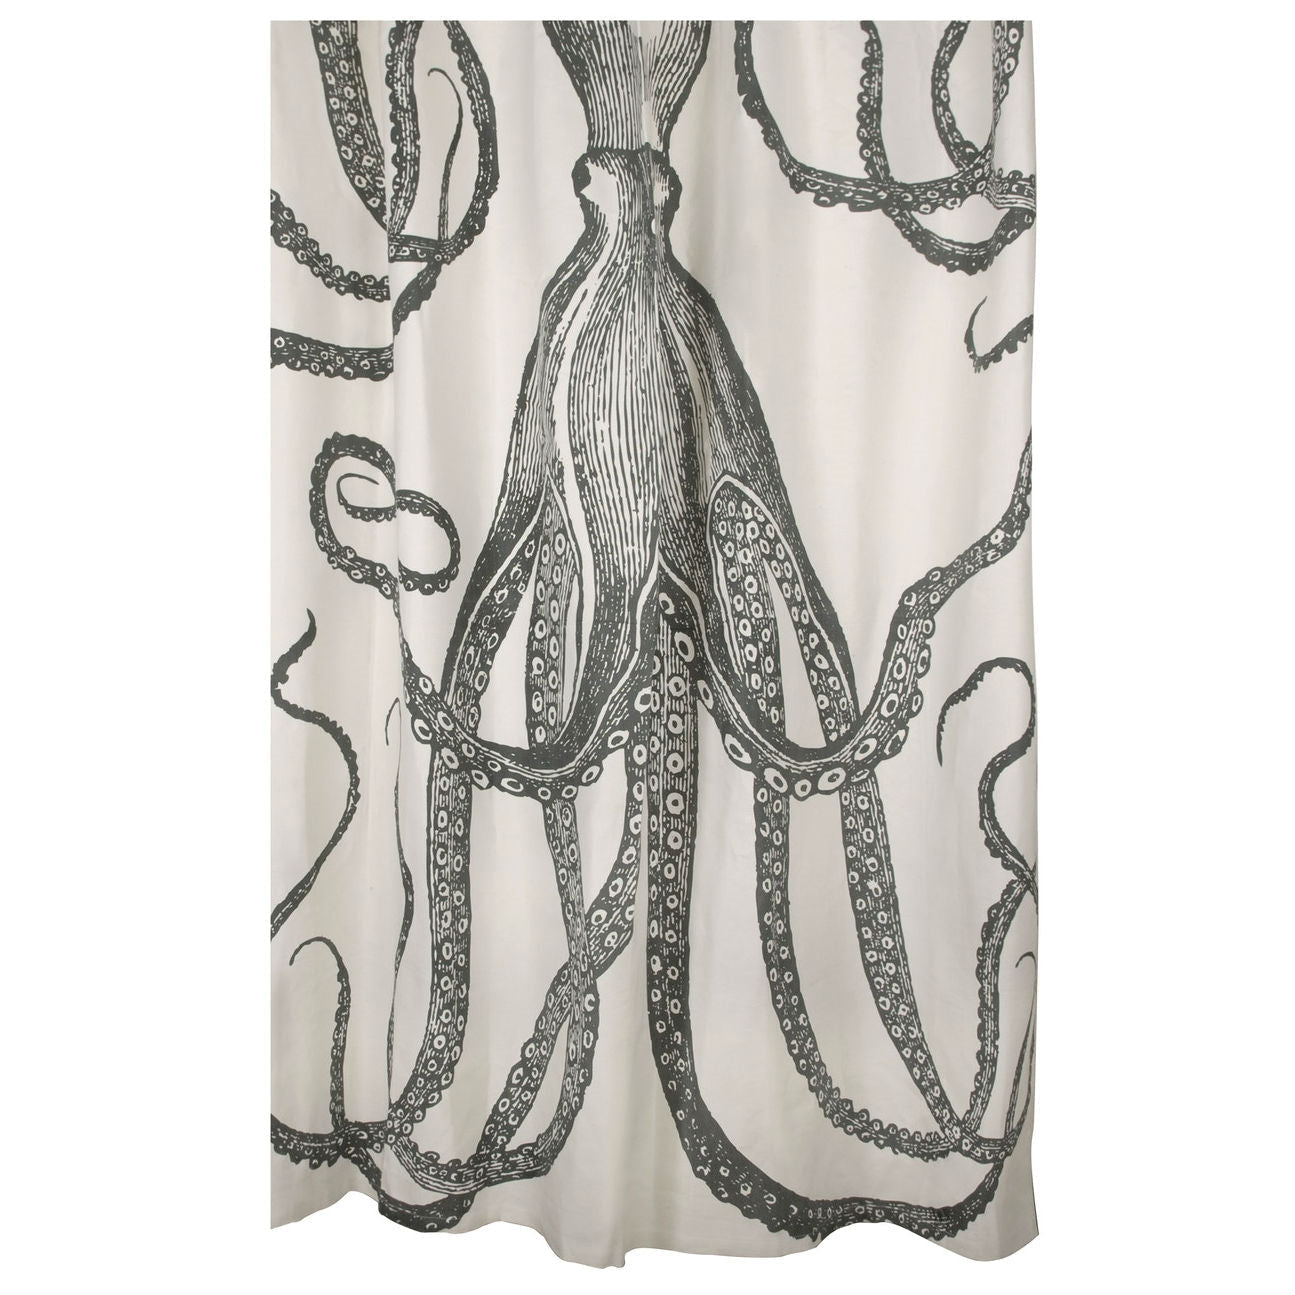 Bathroom > Shower Curtains - Black And White Octopus Shower Curtain 100-Percent Cotton 72 X 72-inch